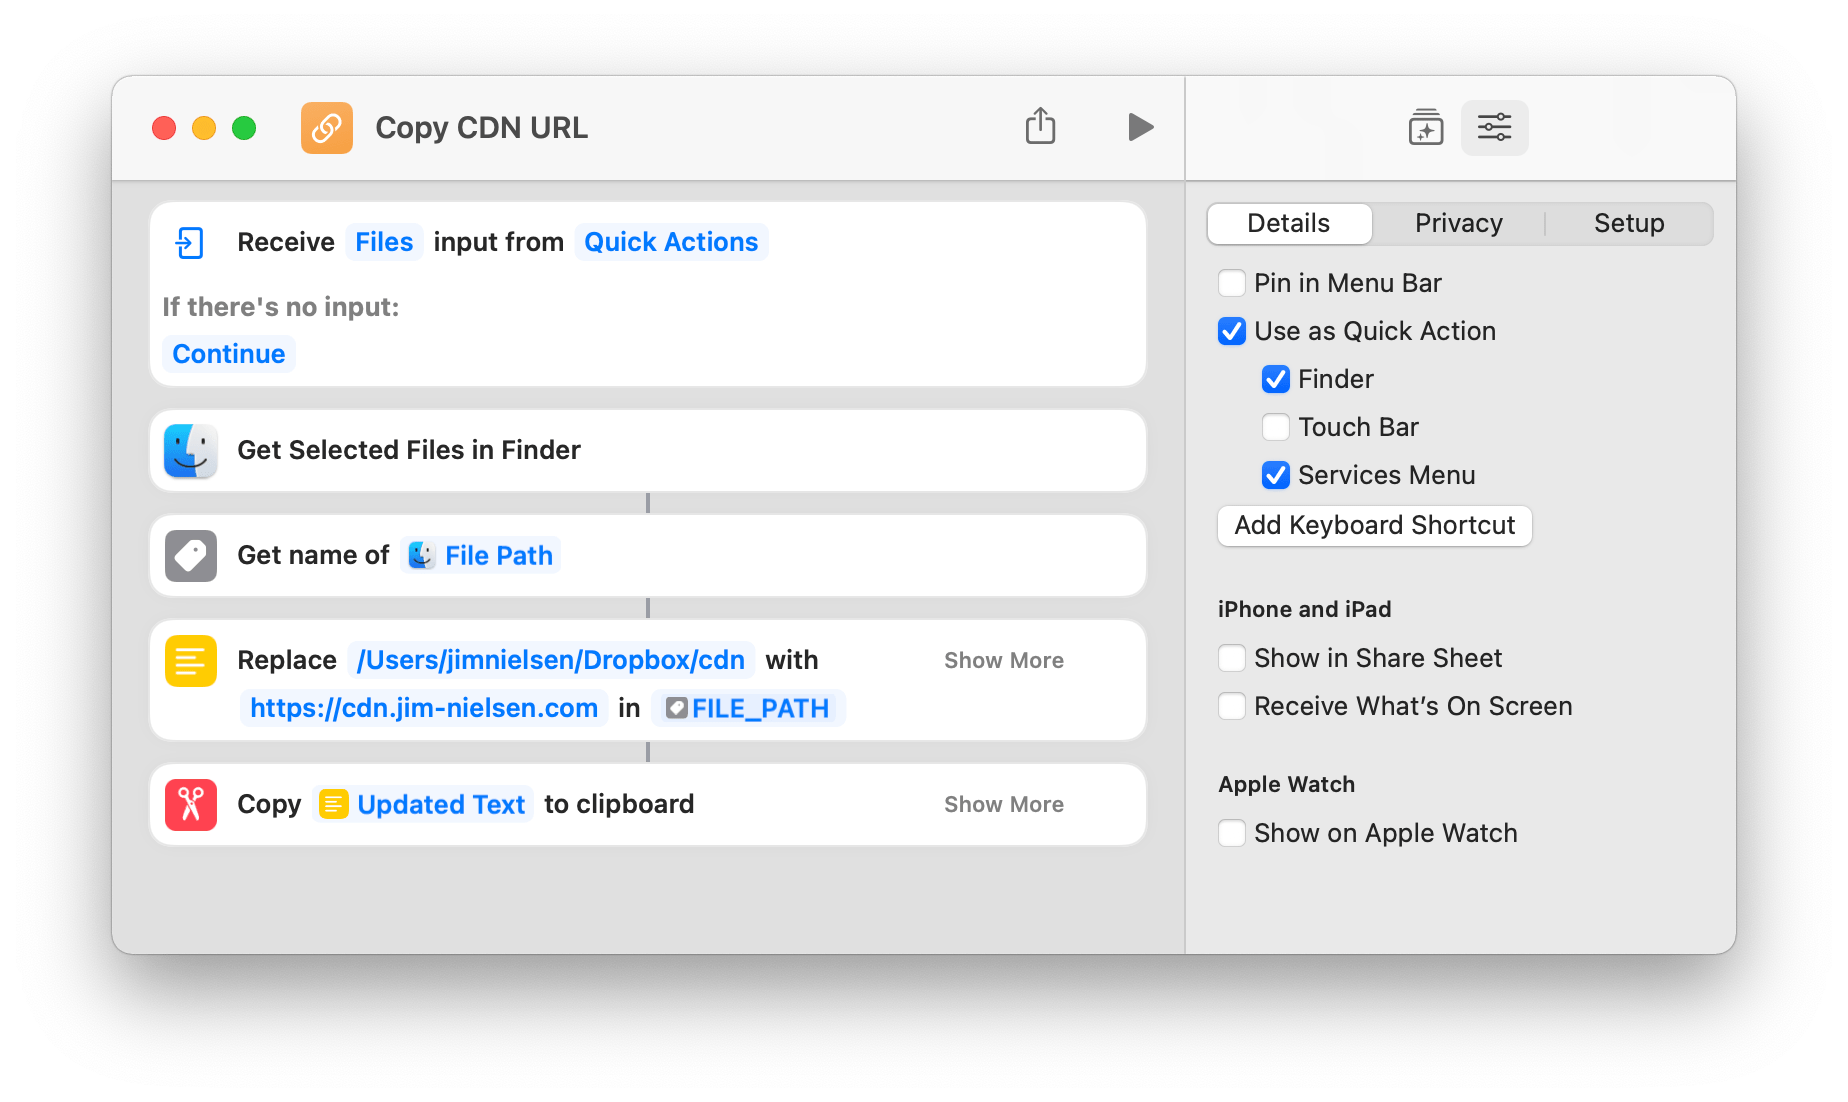 Screenshot of the Shortcuts app on macOS with a string of workflow actions showing how to take a file on disk as an input and output a public-facing URL for that image.